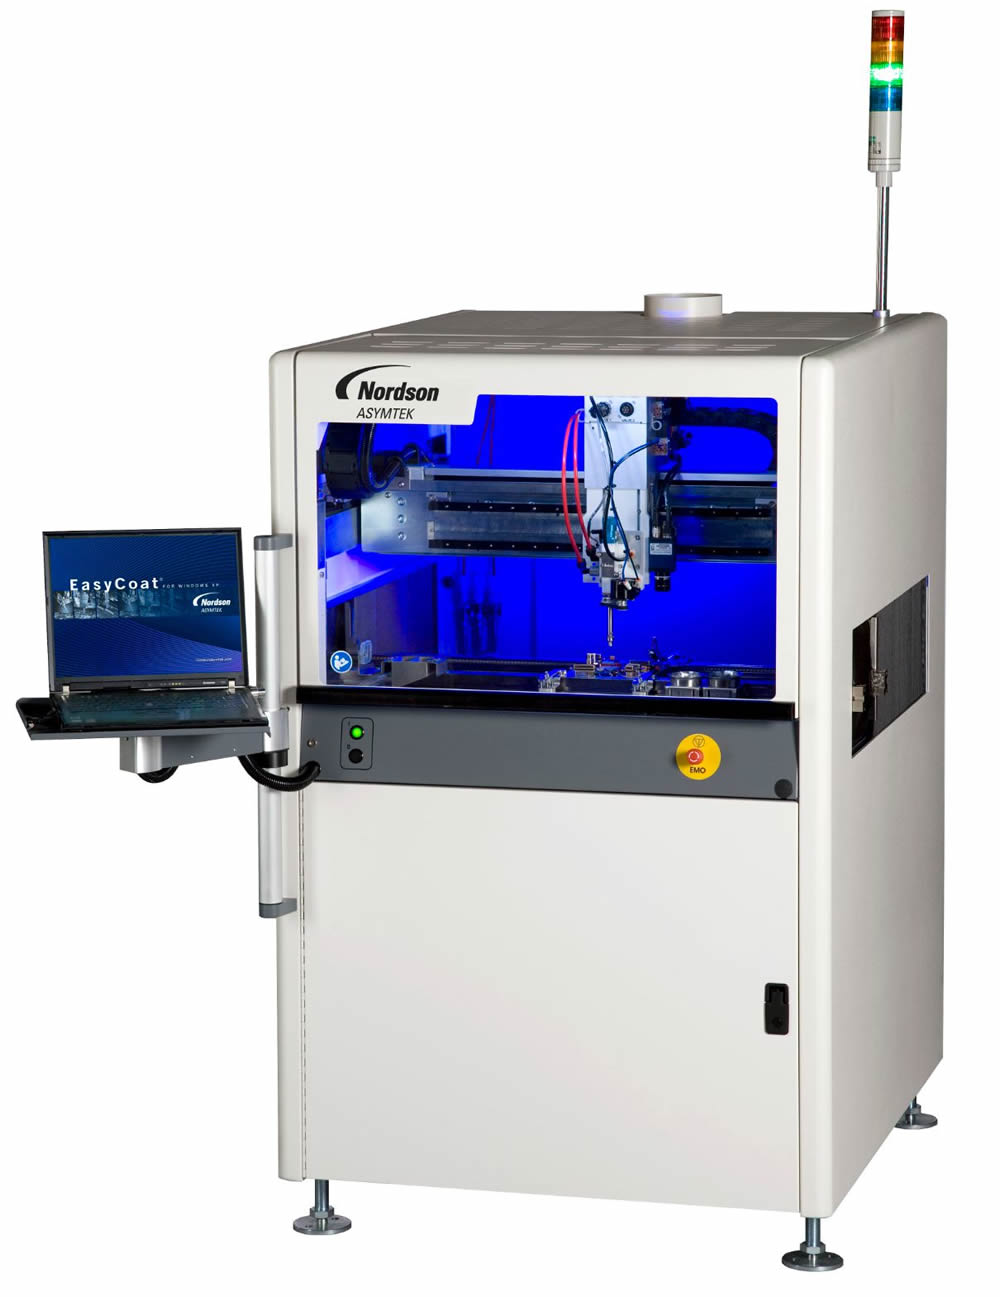 Conformal Coating Machines and Chemicals